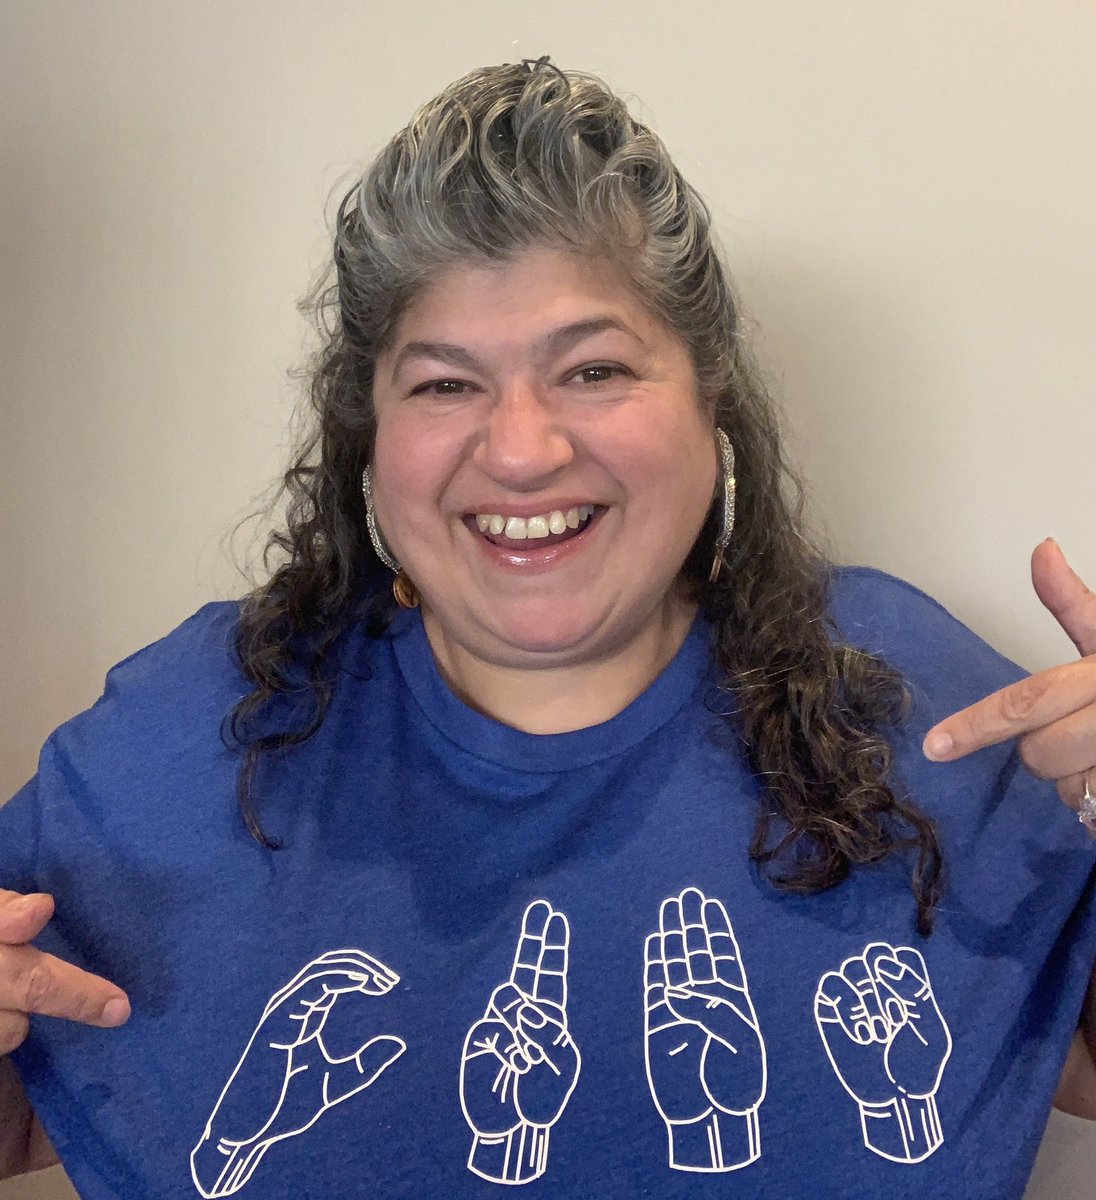 Thank you @obvious_shirts and @WatchMarquee for my custom shirt, Cubs in sign language!  It’s bad ass! Absoluetly love it! 💙 #contest #customshirt #NextStartsHere